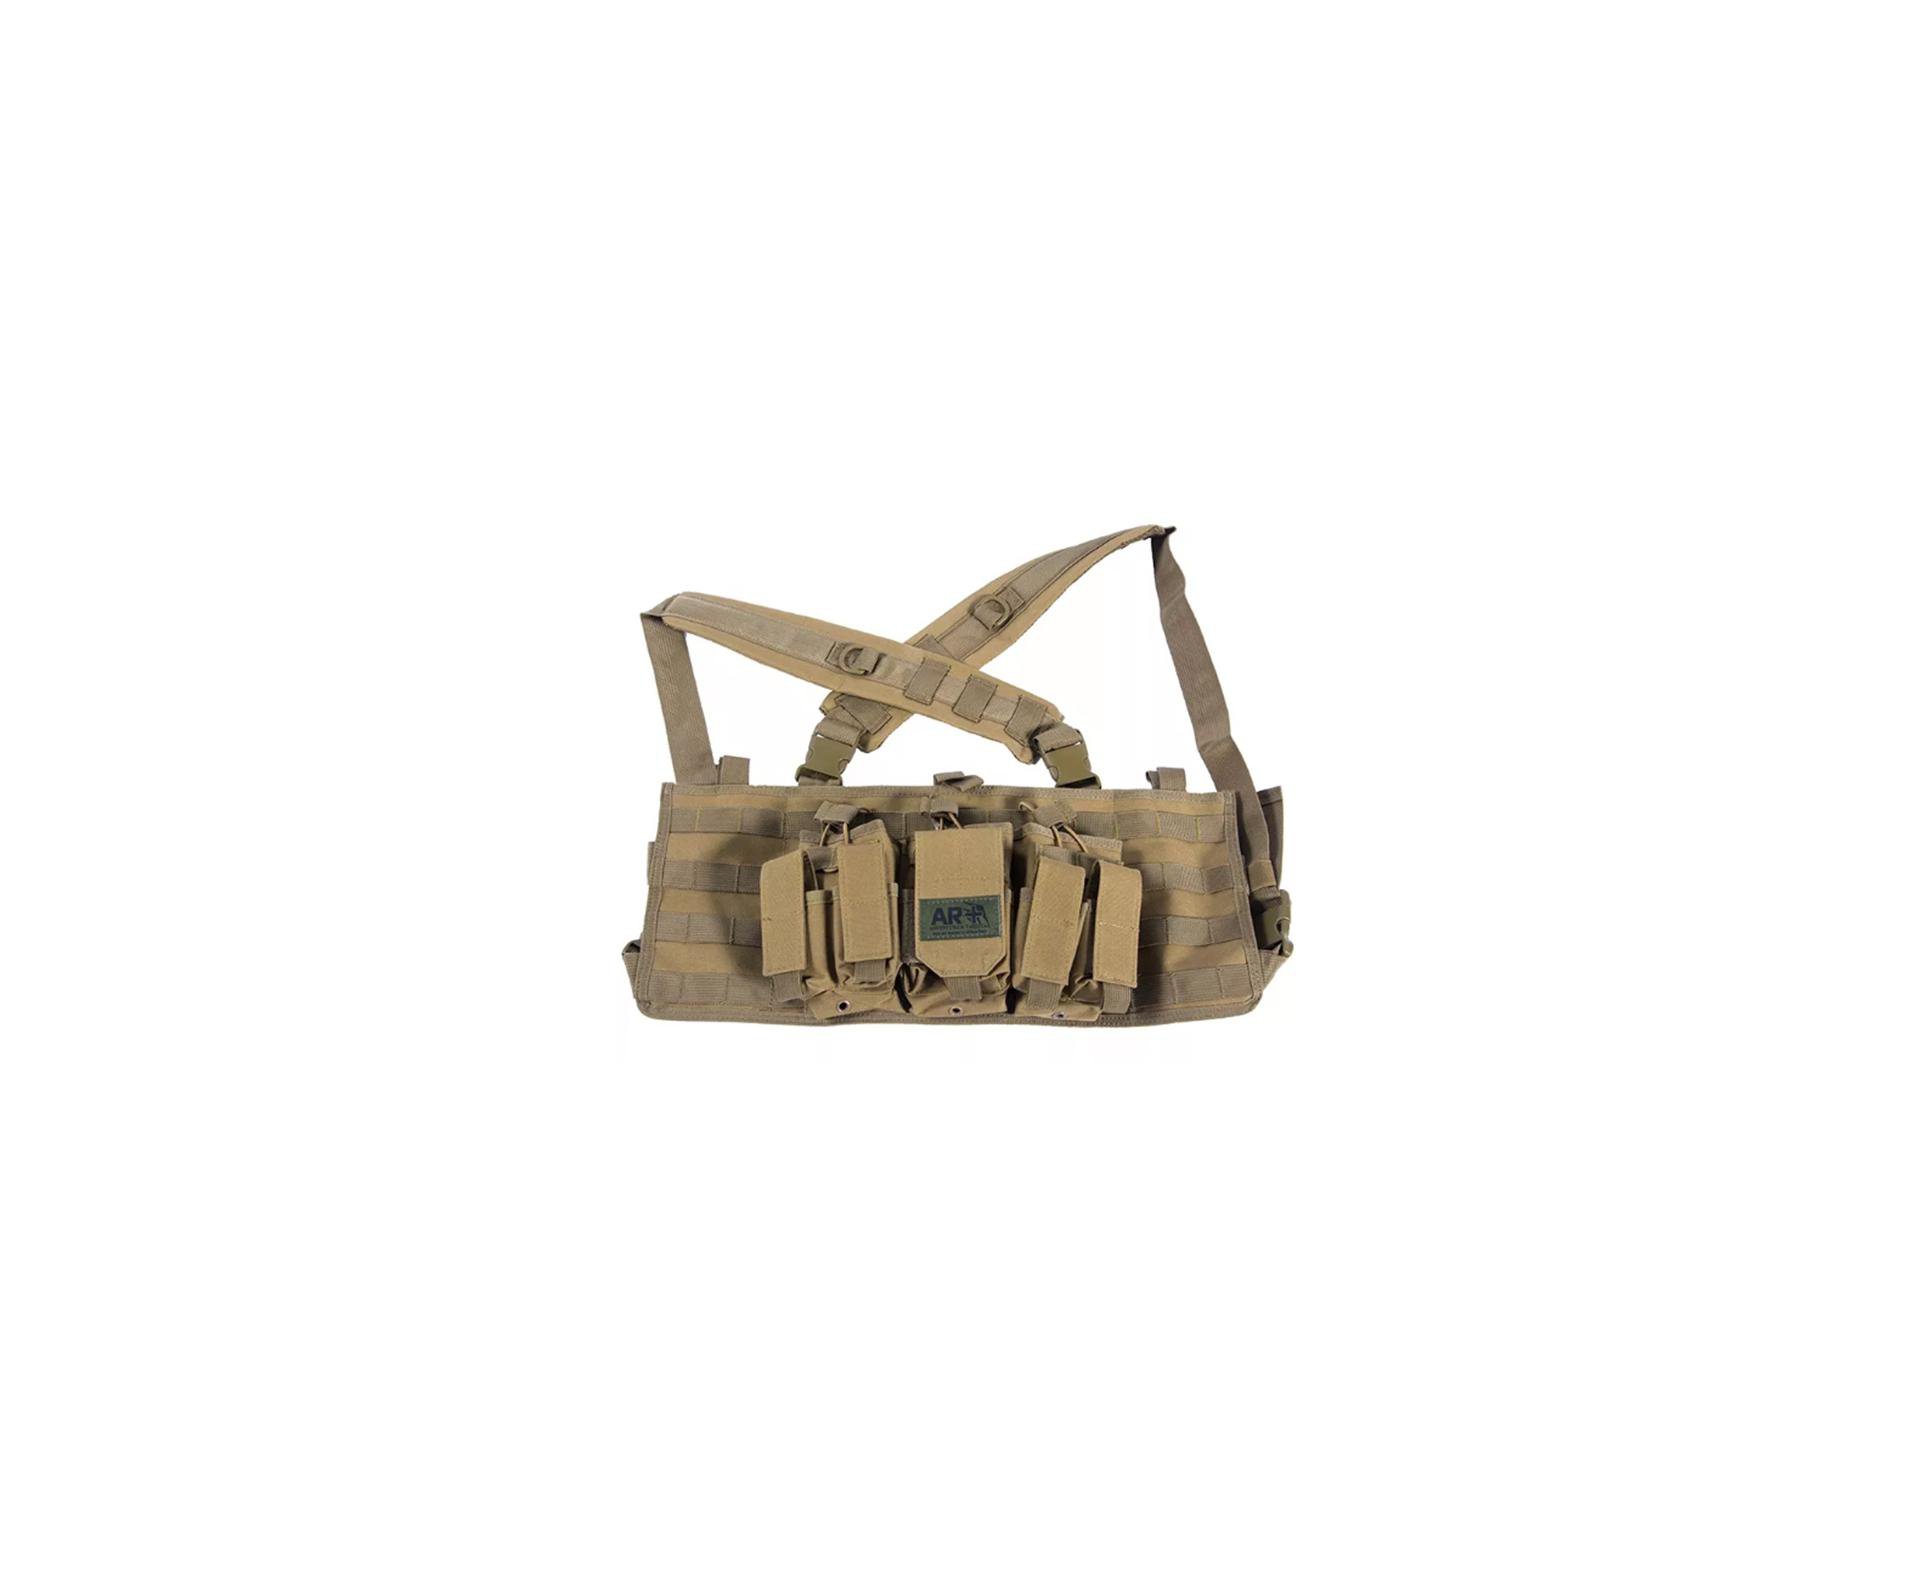 Colete Chest Rig Tático Modular Tactical Harness - Ct-2087tn